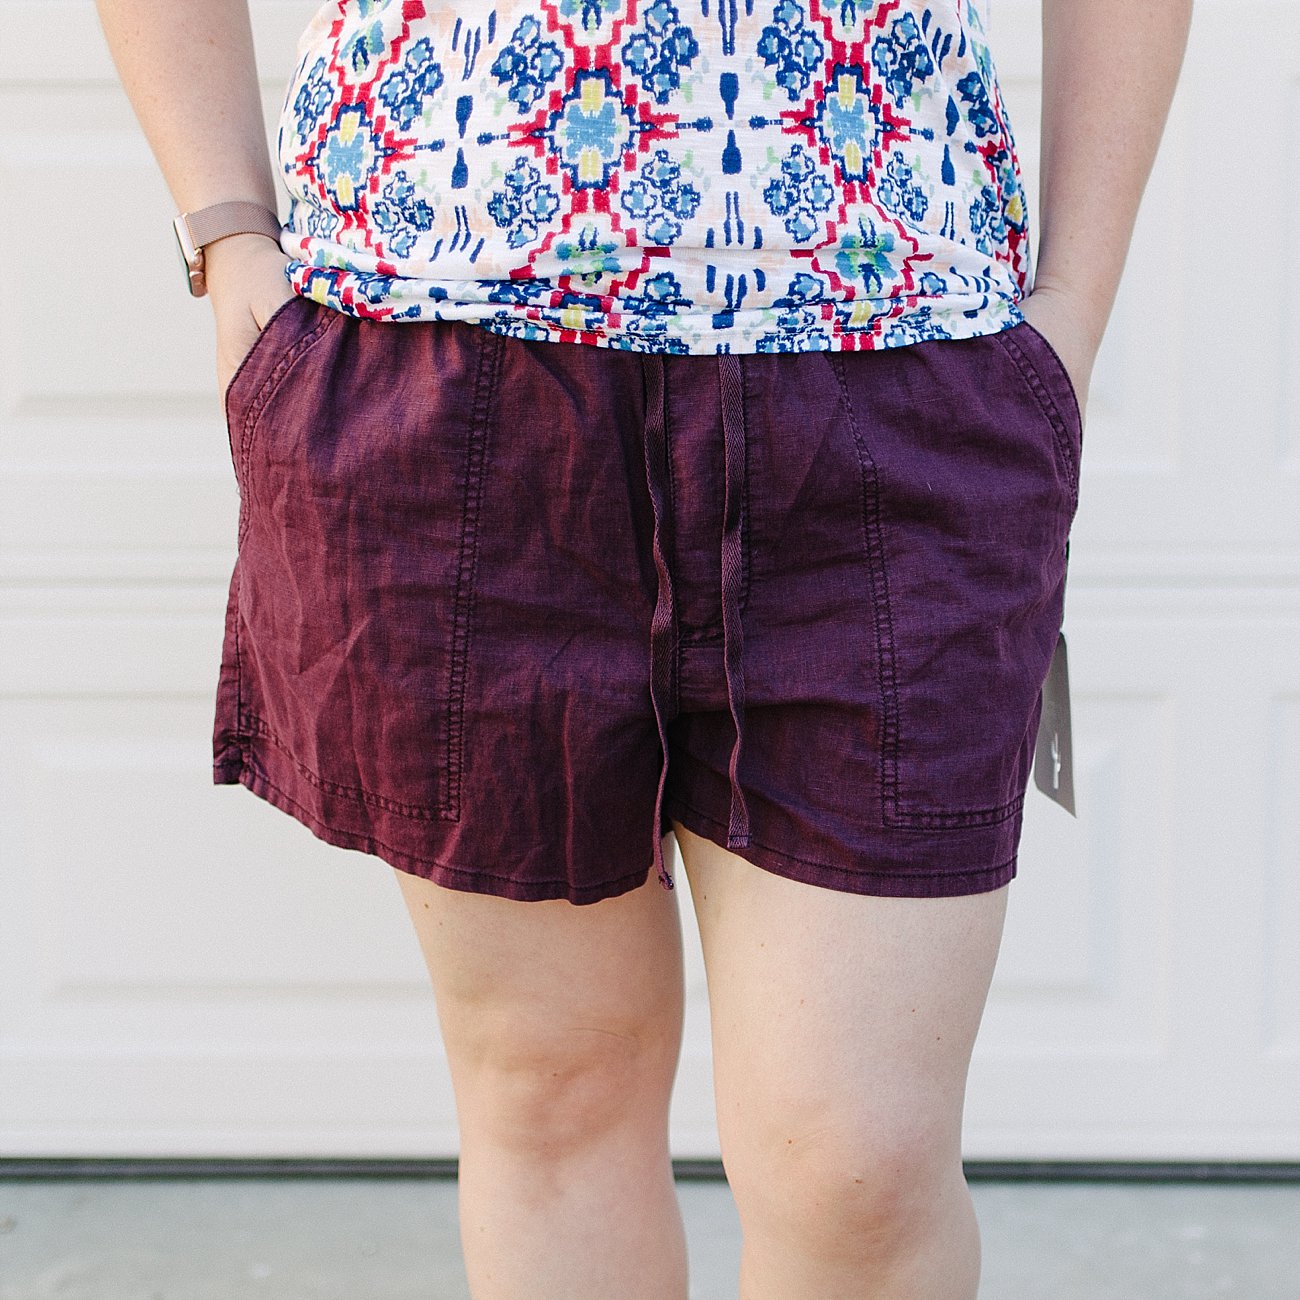 Pistola "Maia Linen Short" - Size XL - $68 - Stitch Fix Review #48 by North Carolina ethical fashion blogger Still Being Molly